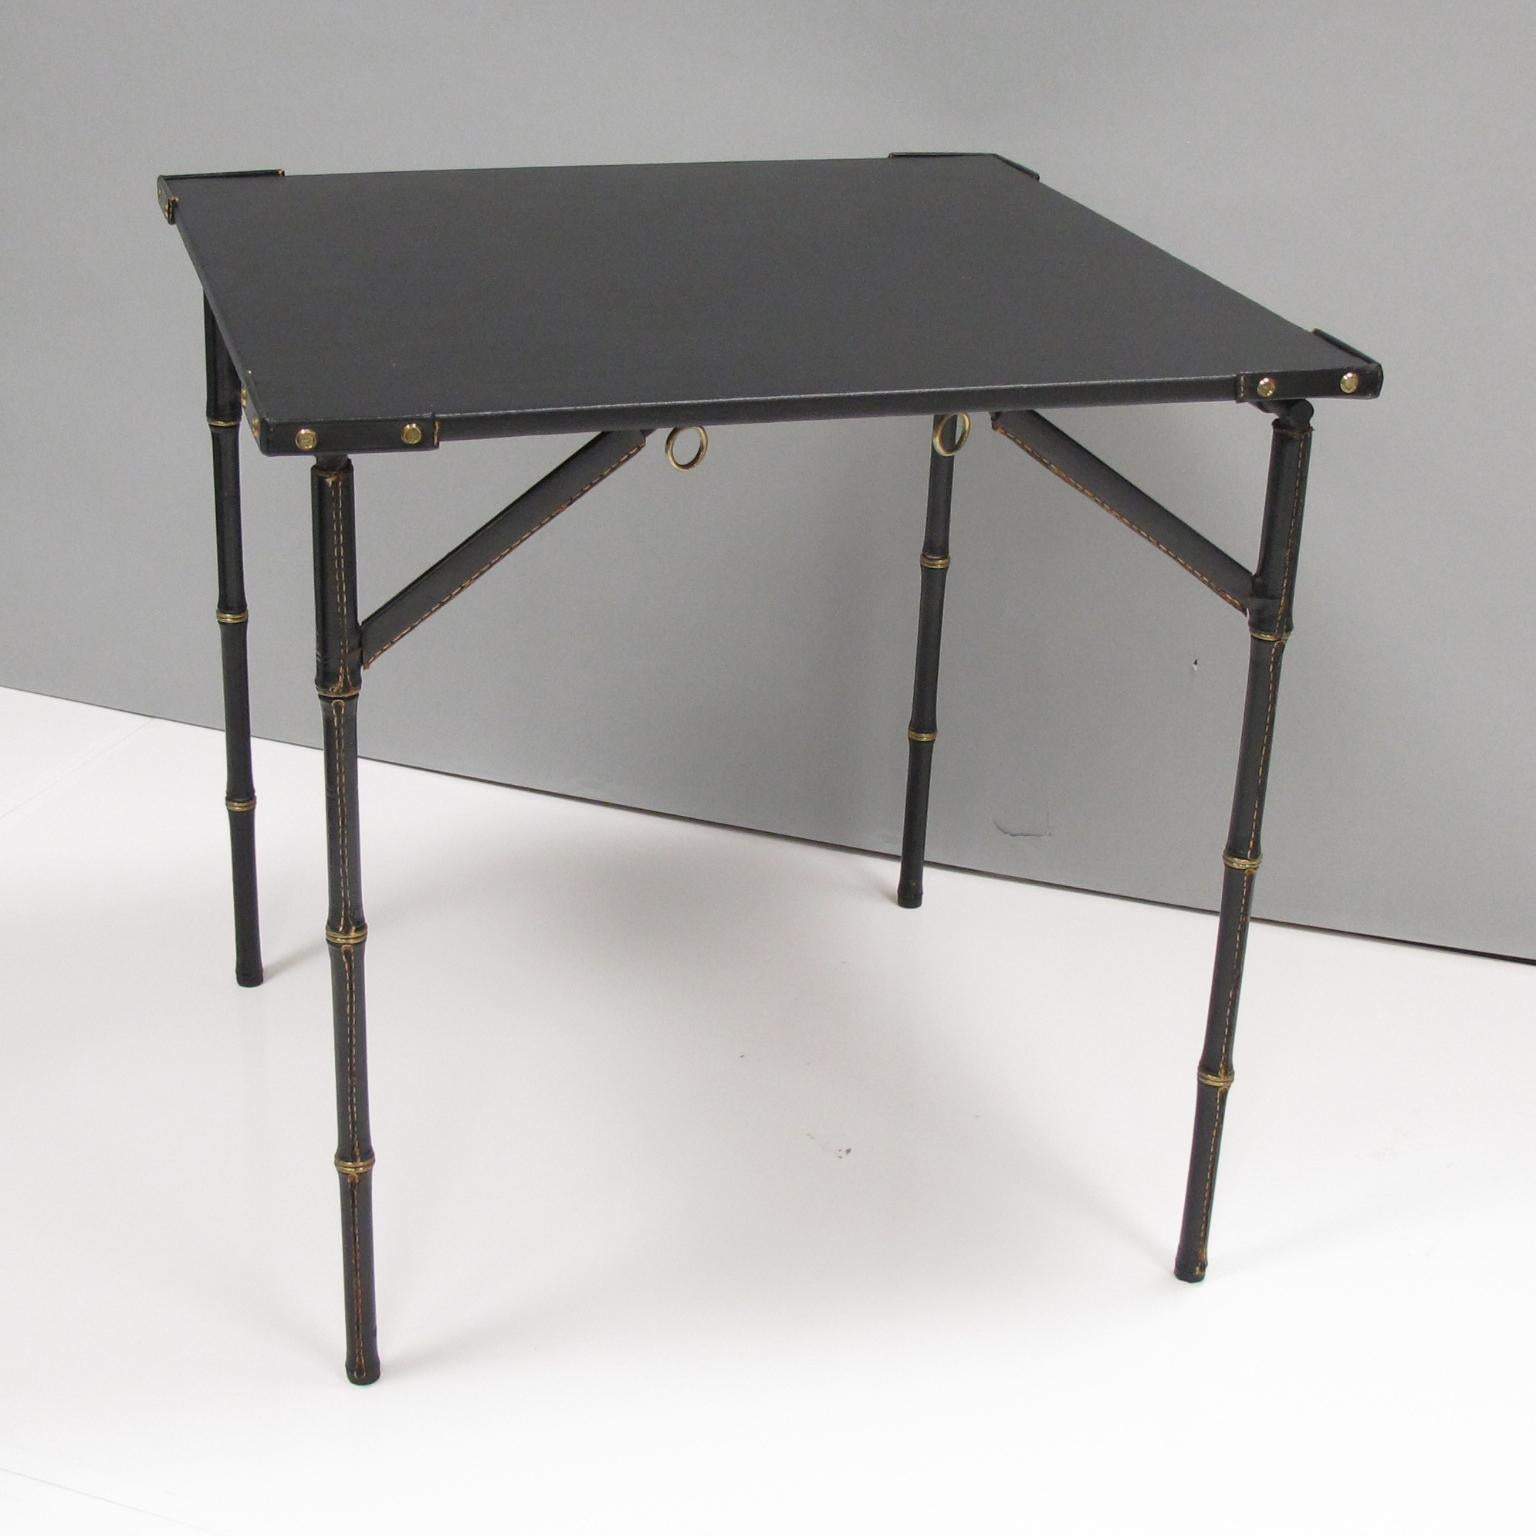 Jacques Adnet Folding Table Hand-Stitched Black Leather Bamboo Brass Design 1